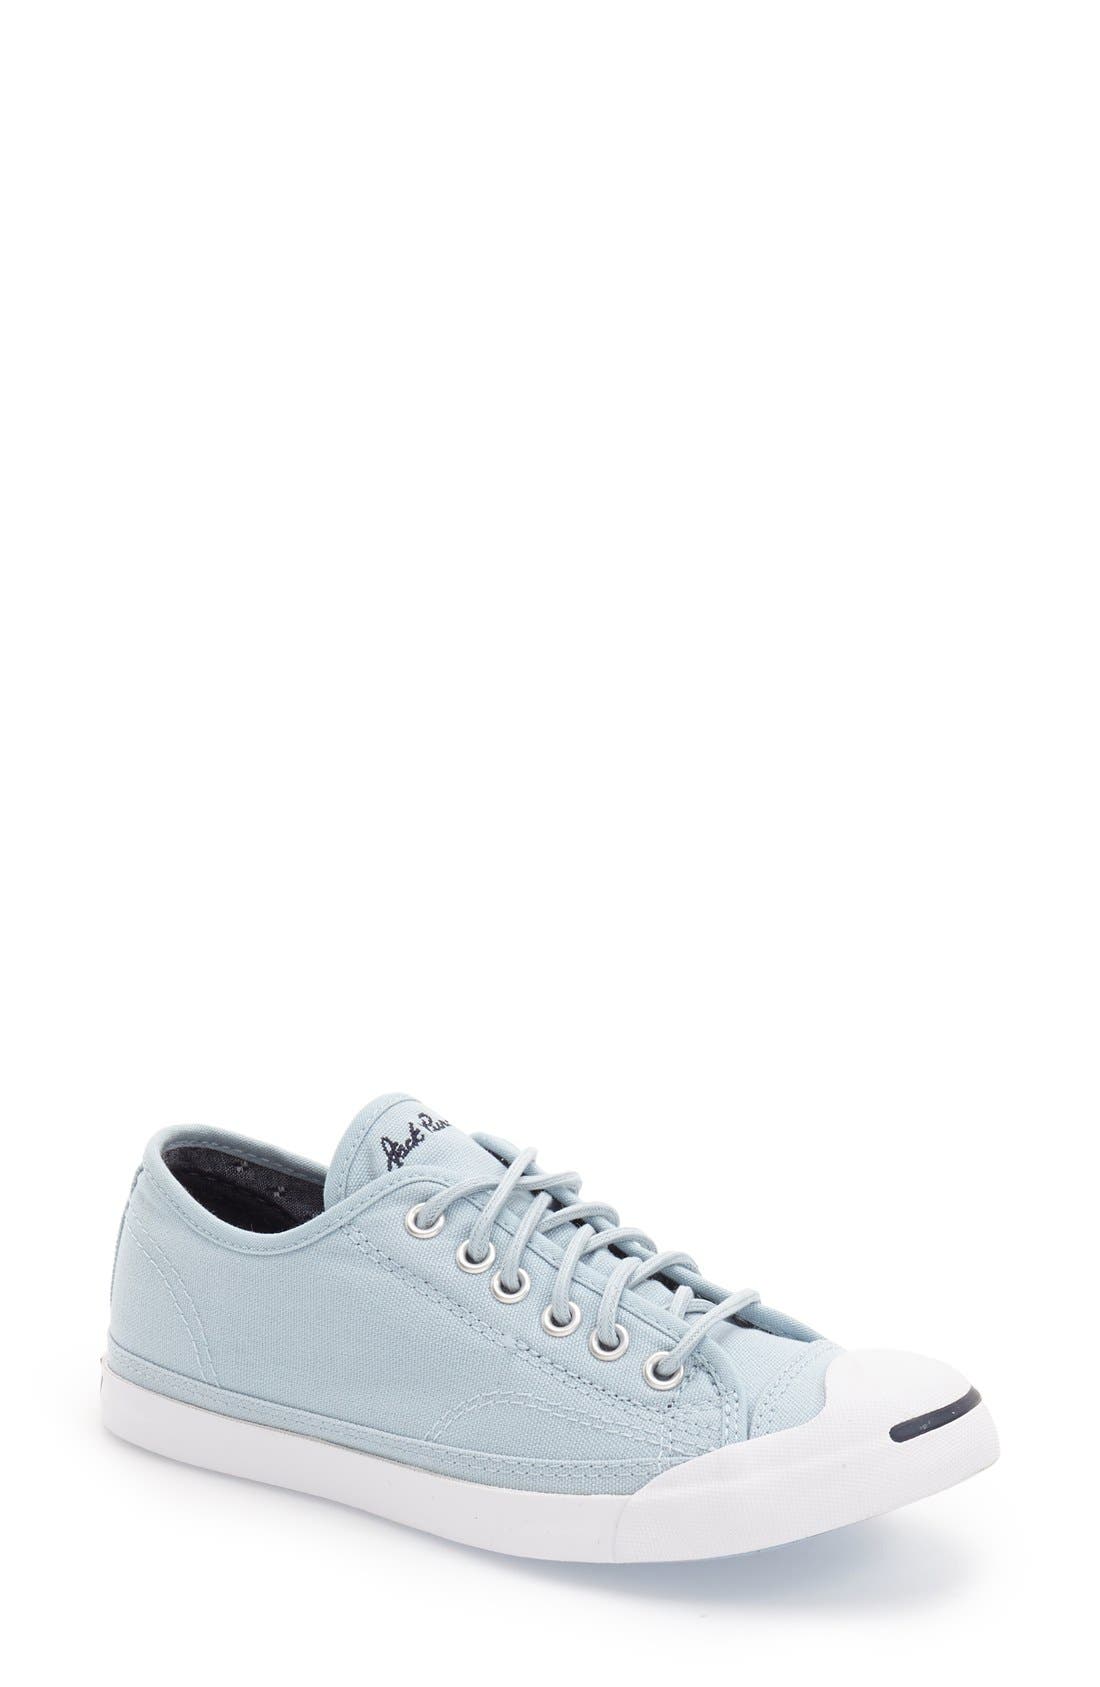 jack purcell shoes nordstrom